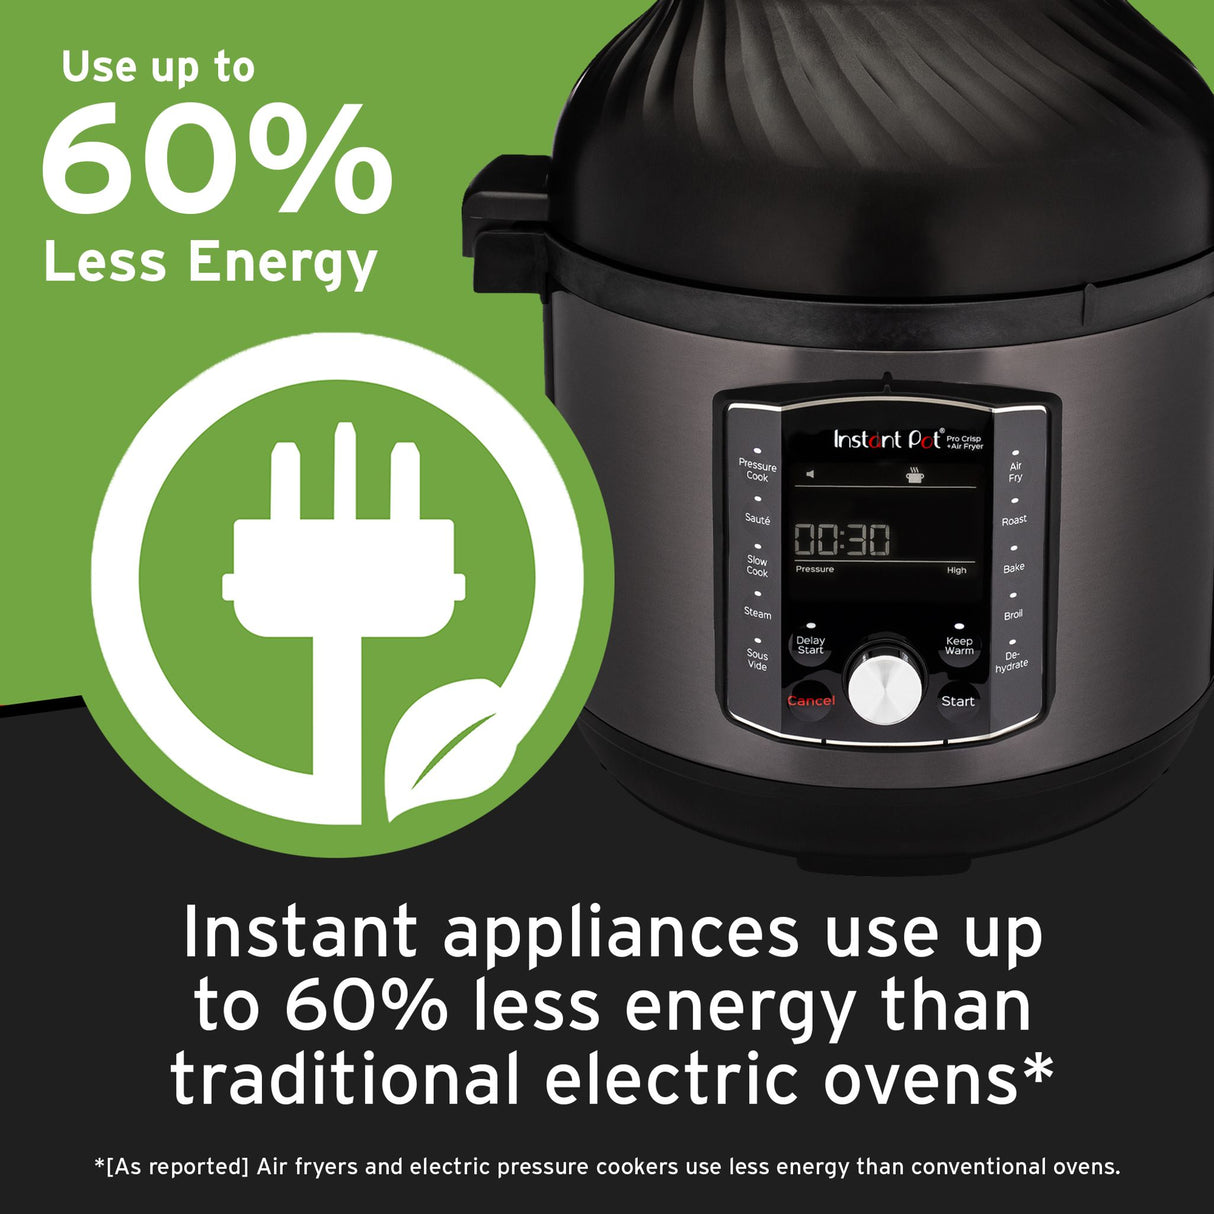  Instant Pot® Pro™ Crisp &amp; Air Fryer 8-qt Pressure Cooker &amp; Air Fryer Lid with text Use up to 60 % less energy